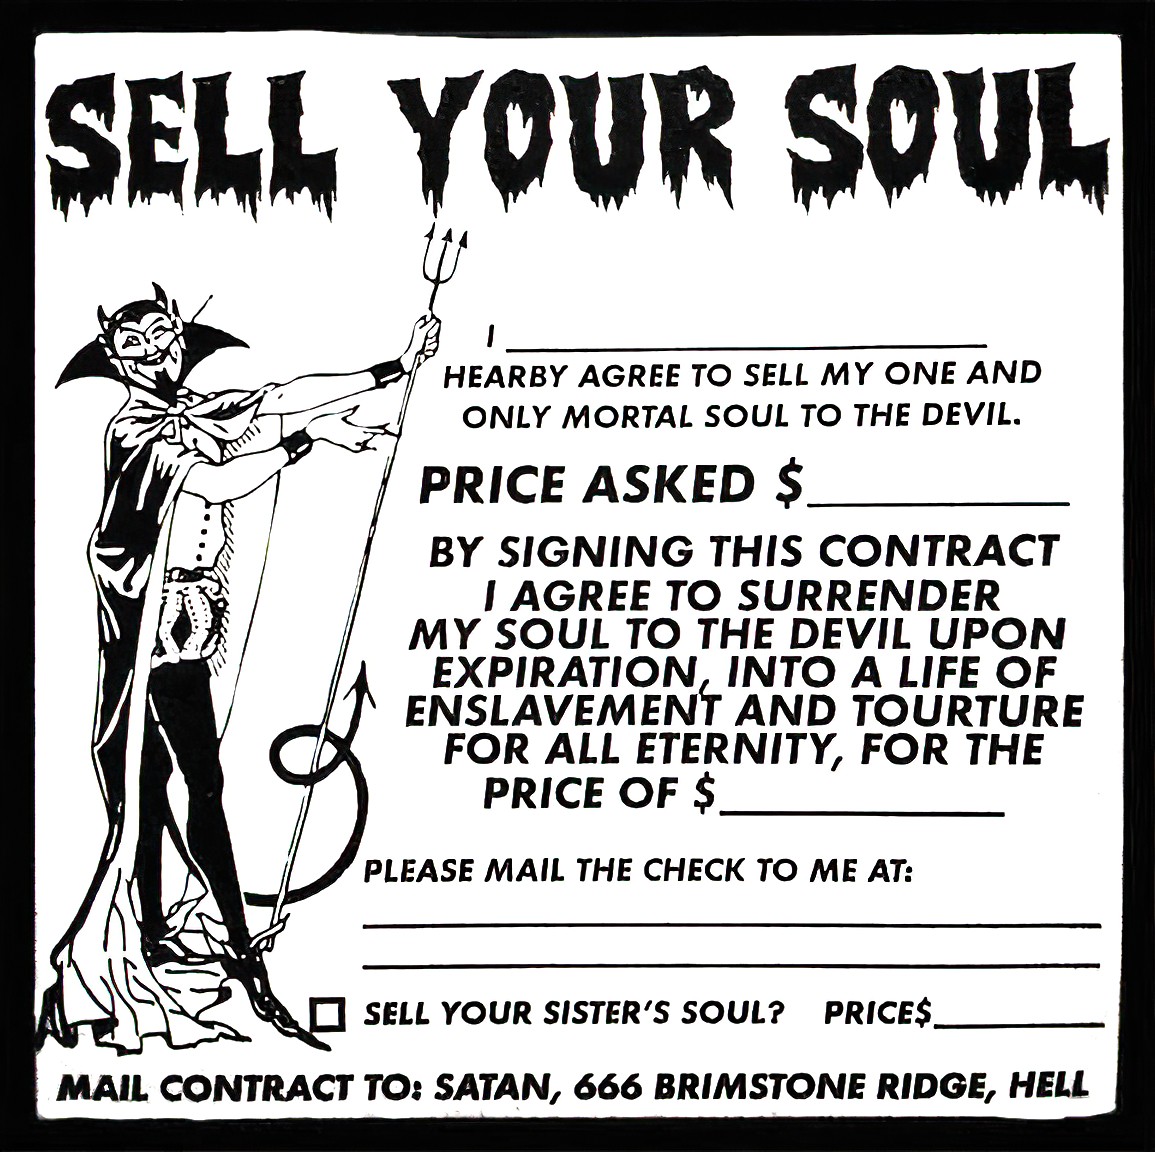 Sell Your Soul Newspaper Advertisement